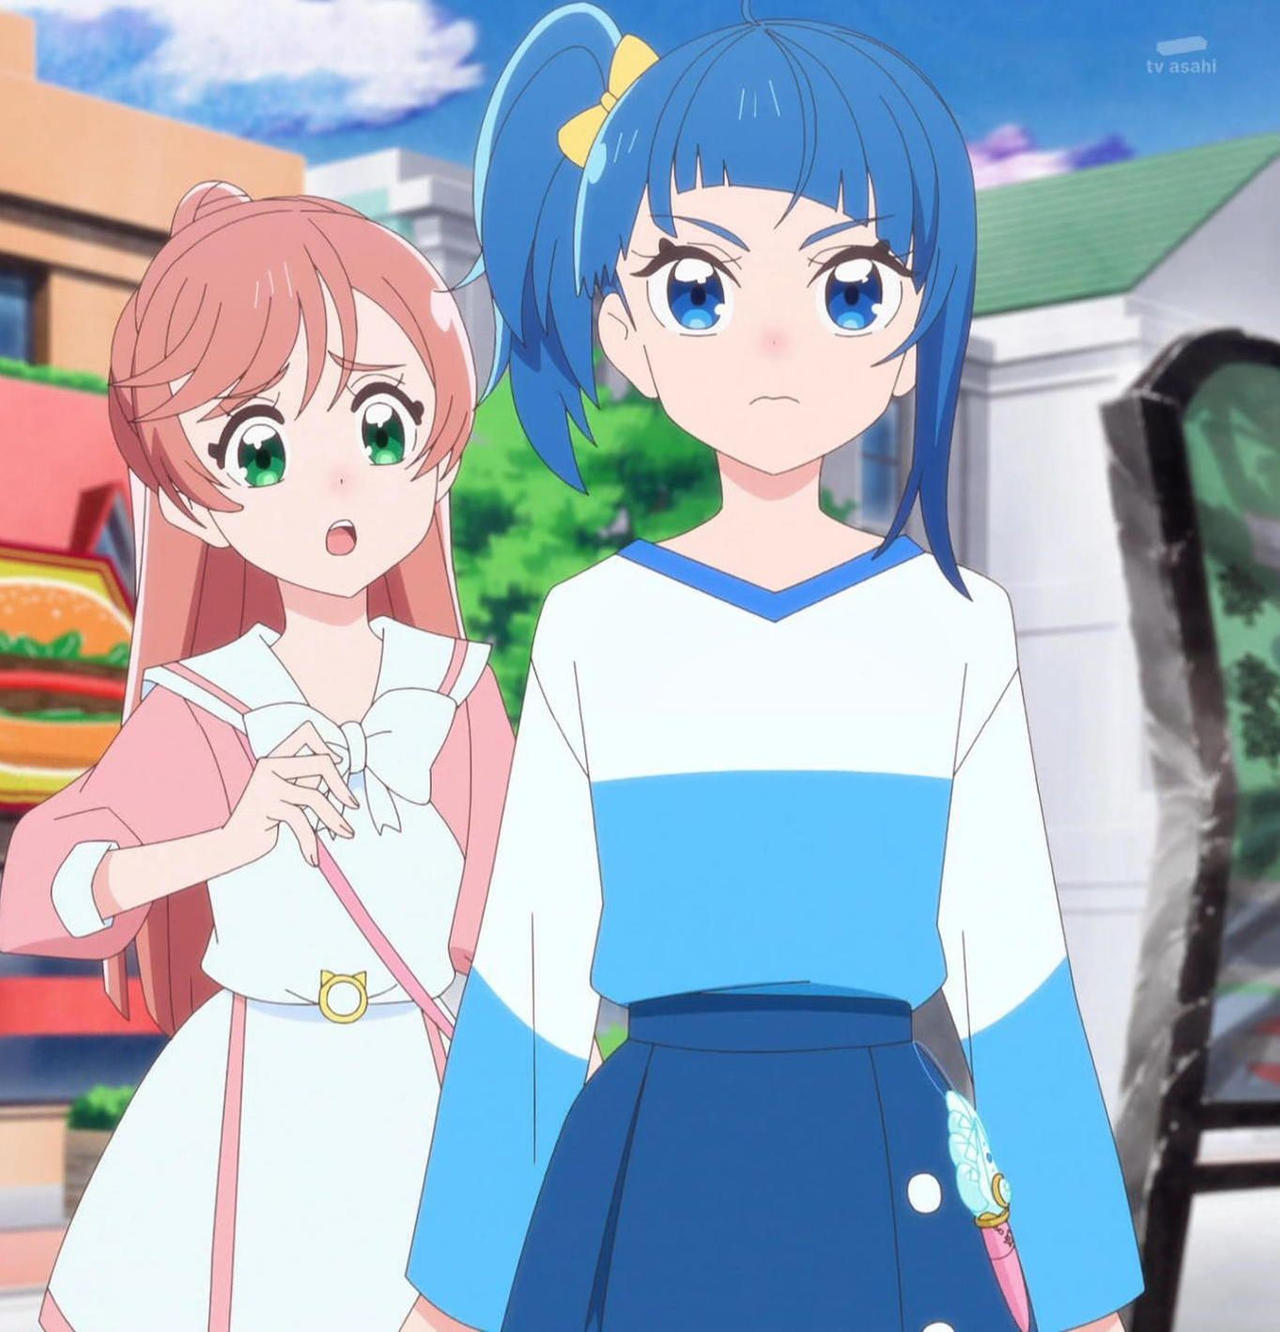 42nd 'Soaring Sky! Precure' Anime Episode Previewed